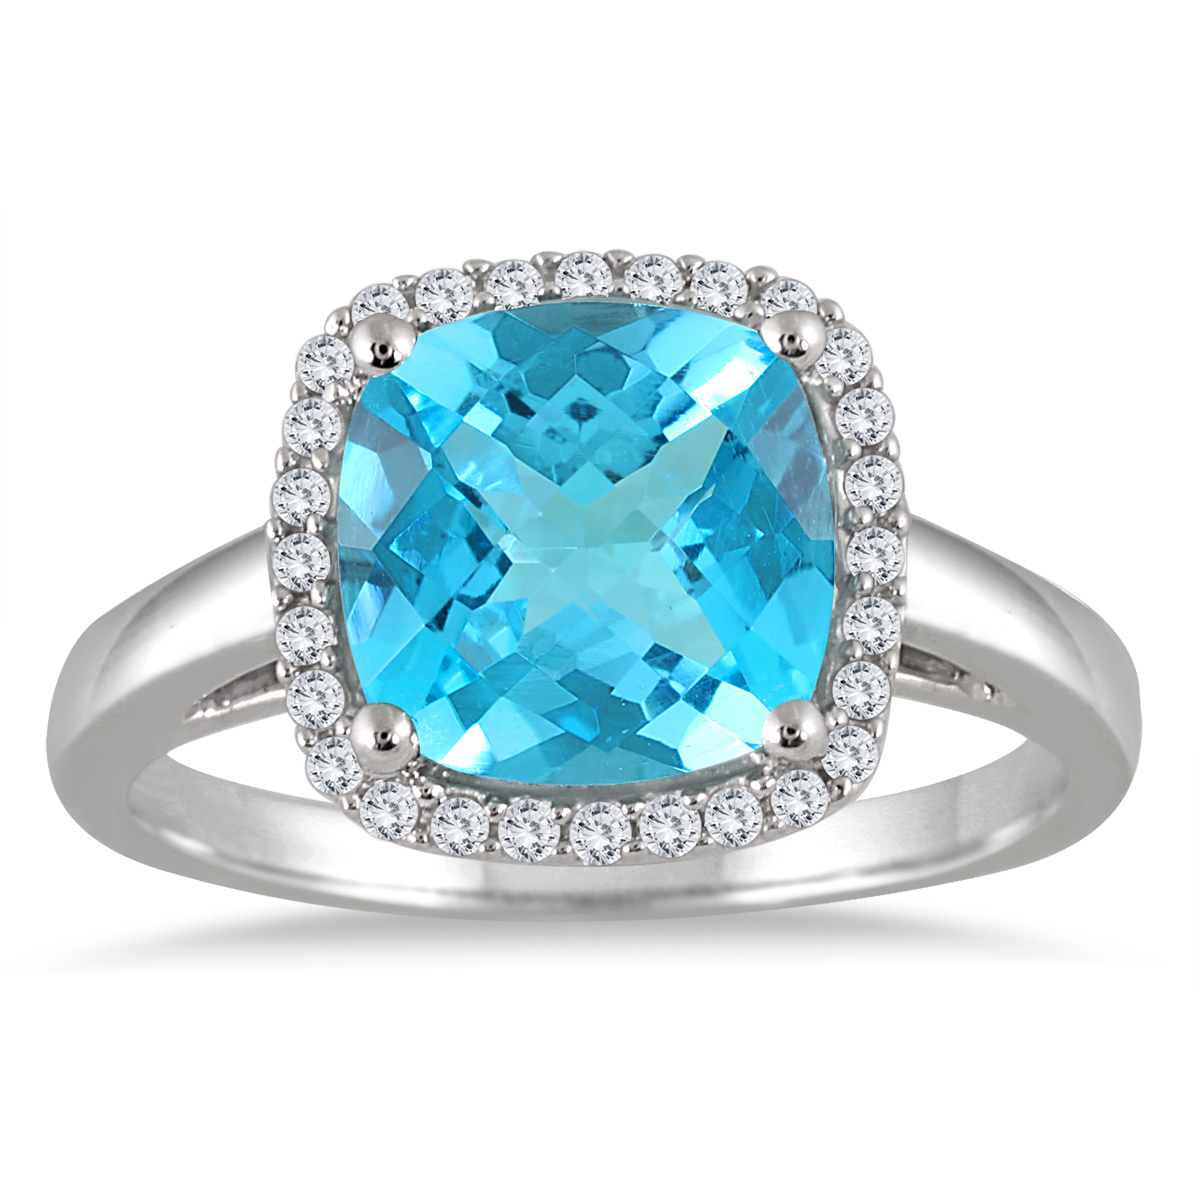 3 1/4 Carat Cushion Cut Blue Topaz and Diamond Halo Ring in 10K White Gold